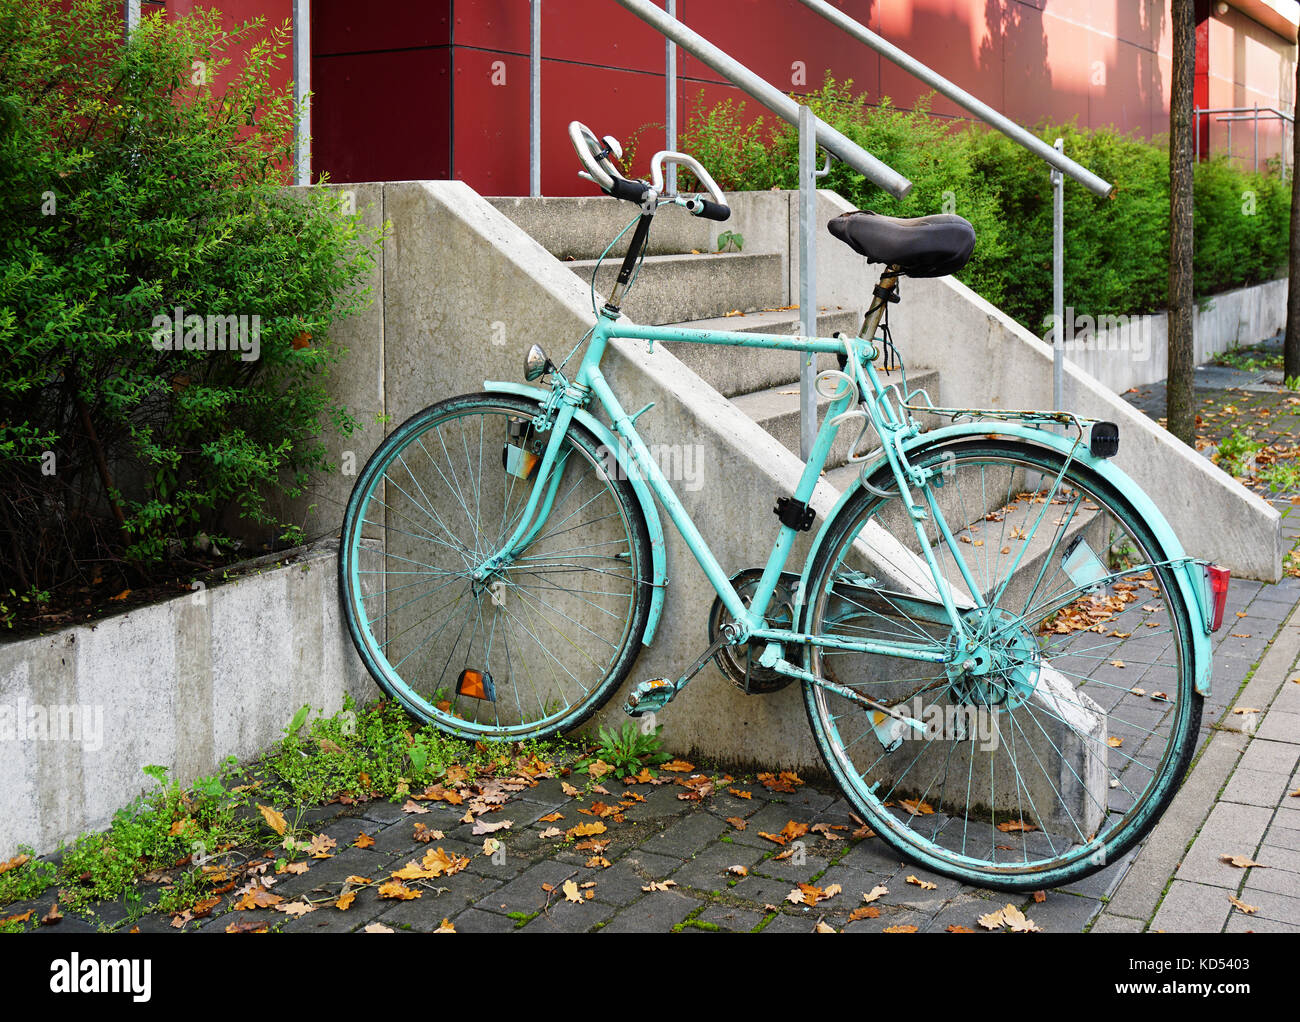 painted bicycle locked to railing Stock Photo